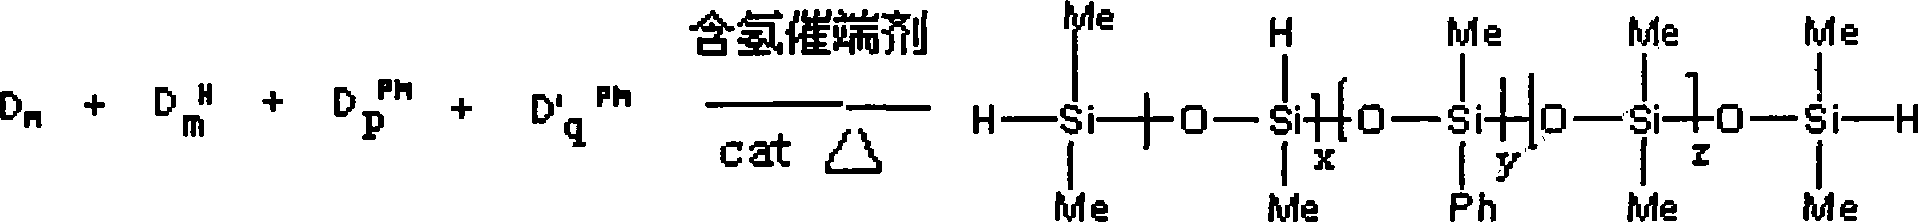 Method for preparing methylphenyl hydrogen-containing silicone oil